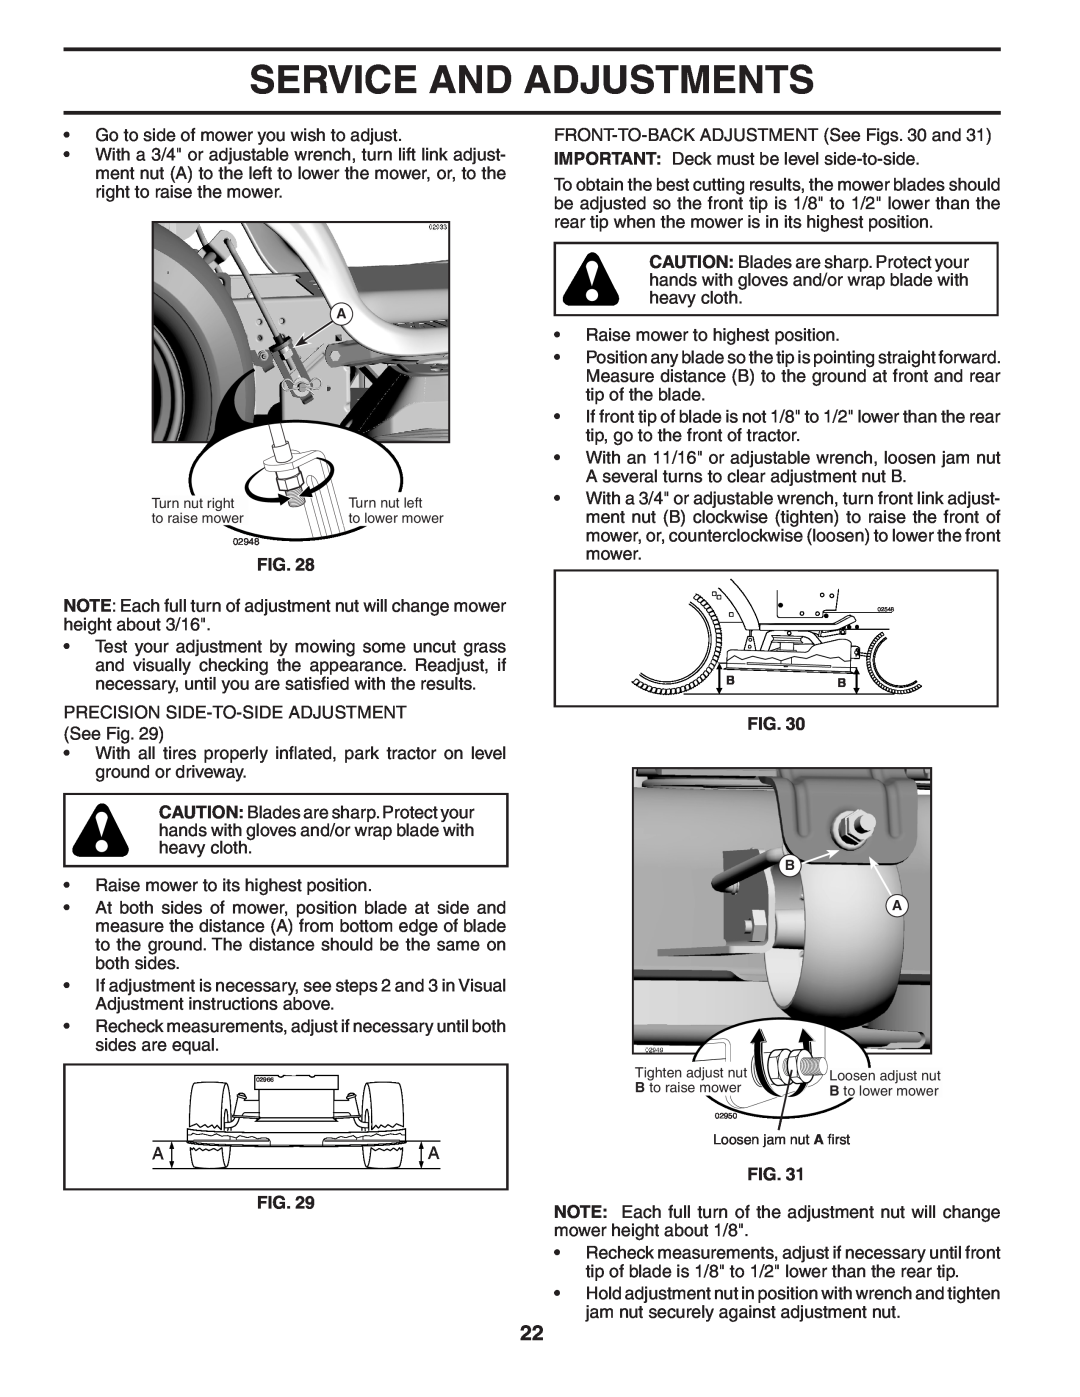 Poulan 402464 manual Service And Adjustments, Turn nut right, Turn nut left, Tighten adjust nut, B to raise mower 